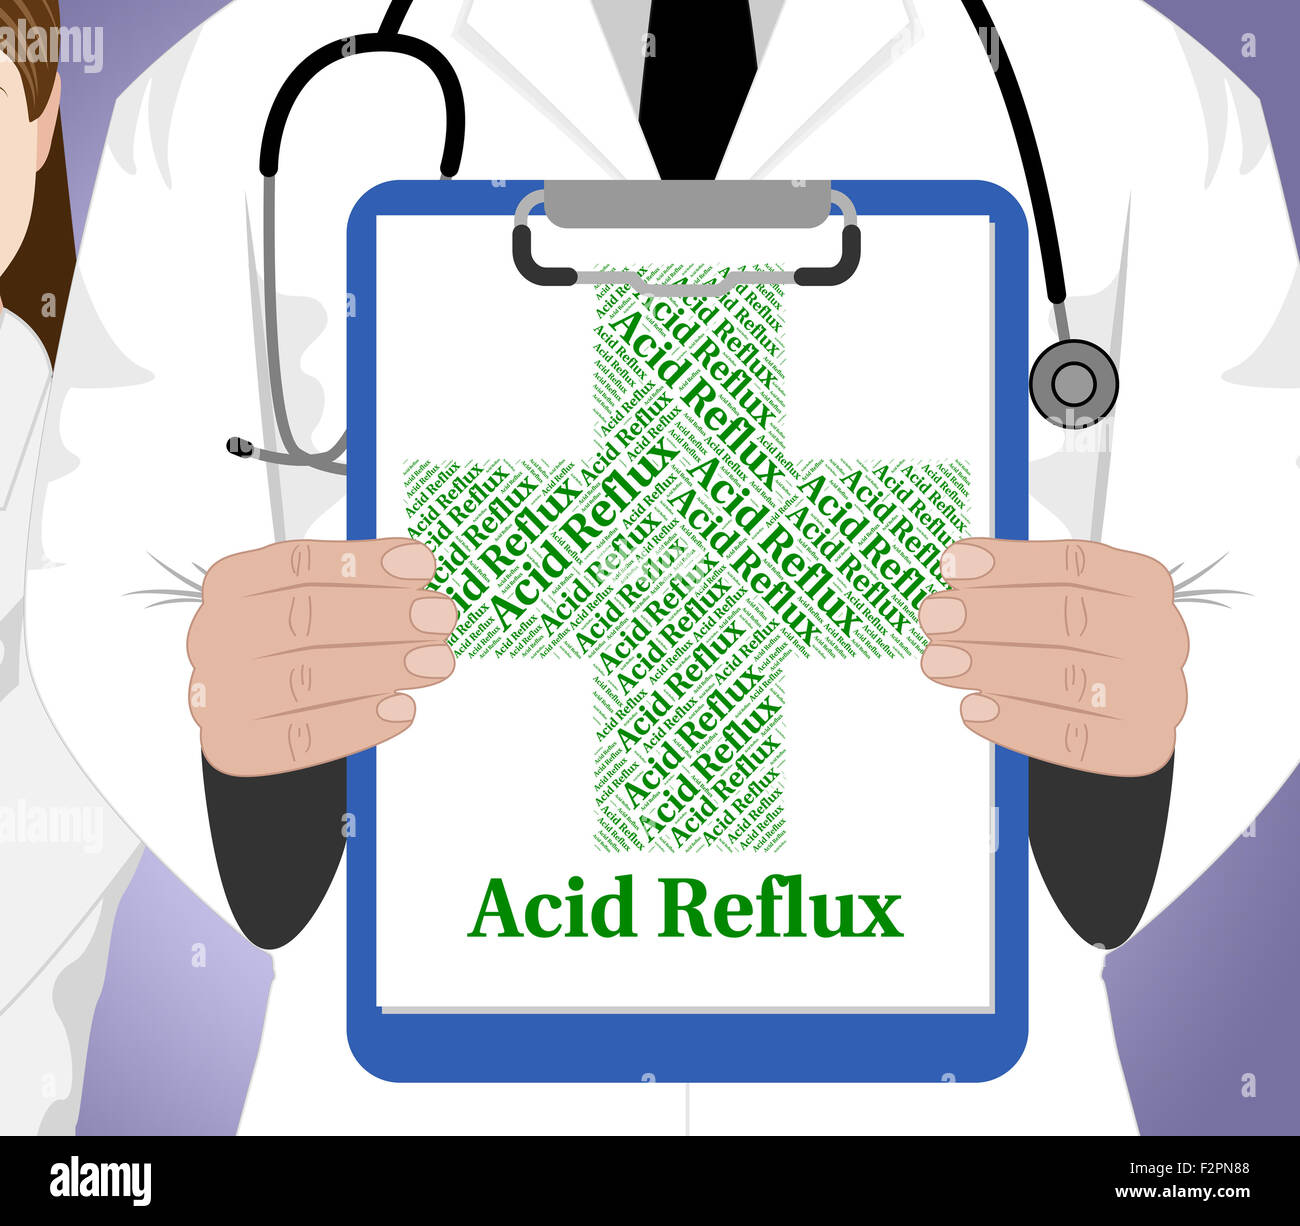 Acid Reflux Representing Poor Health And Attack Stock Photo